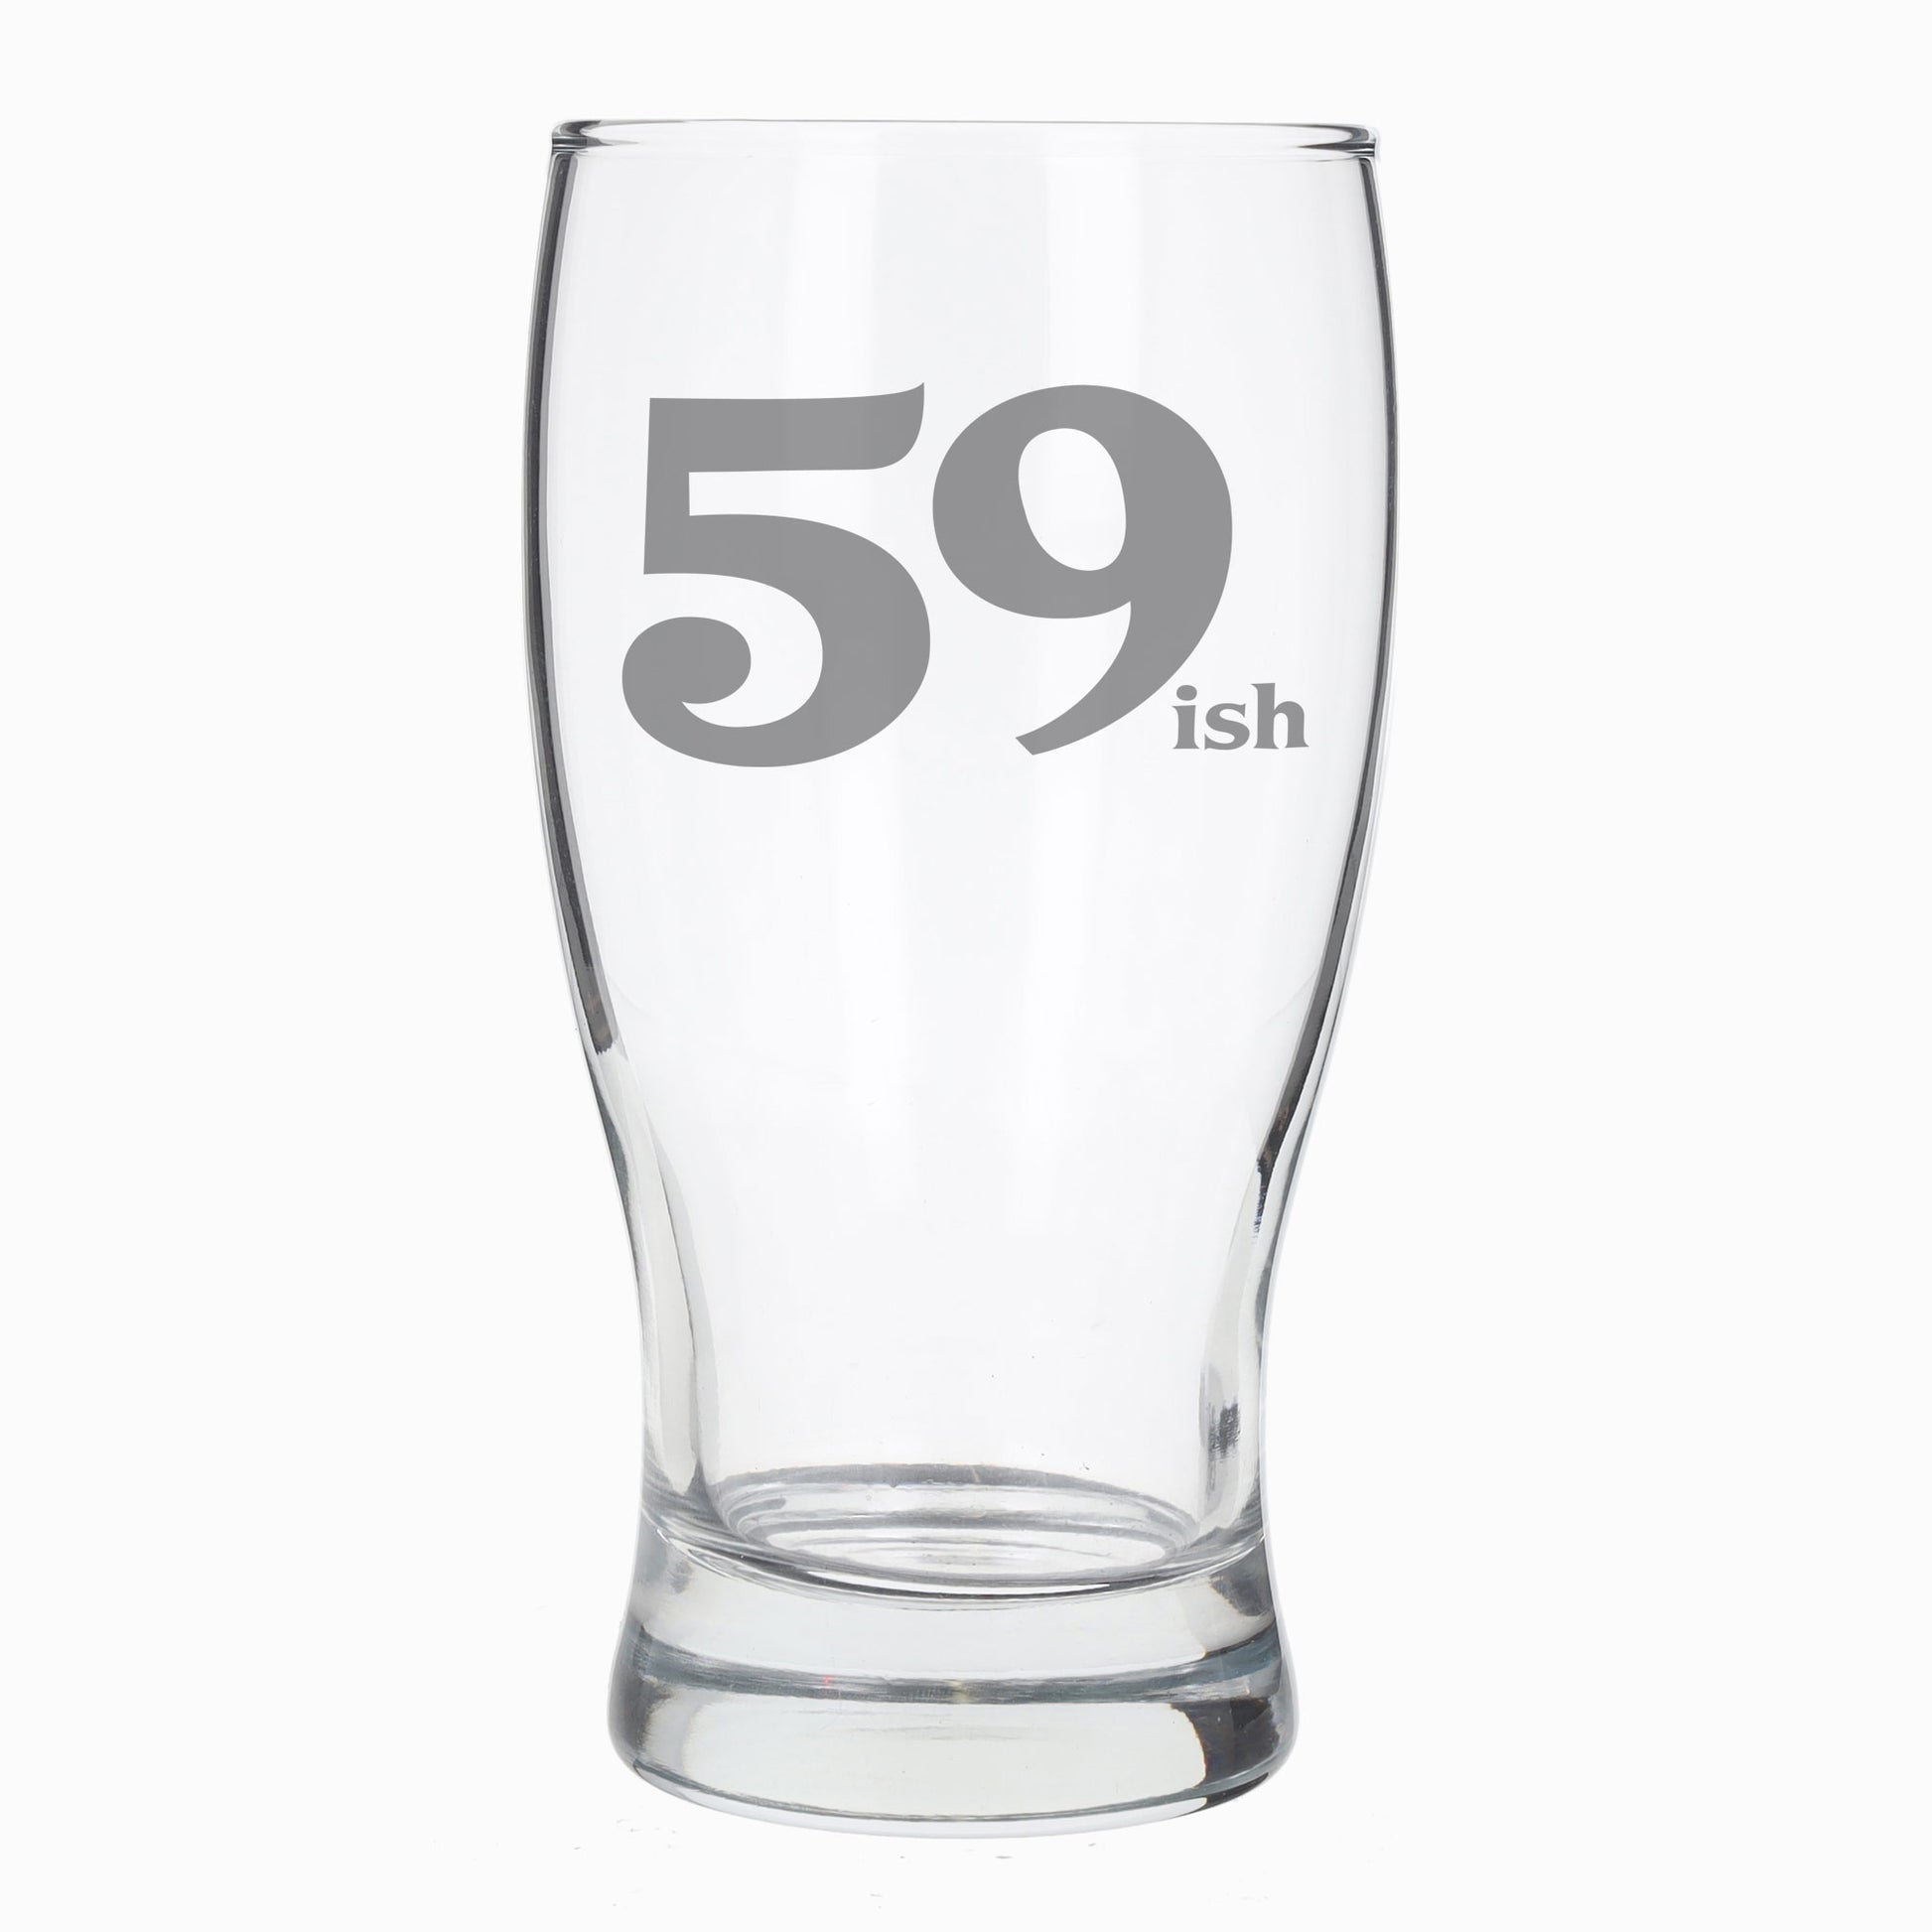 59ish Pint Glass and/or Coaster Set  - Always Looking Good - Pint Glass On Its Own  